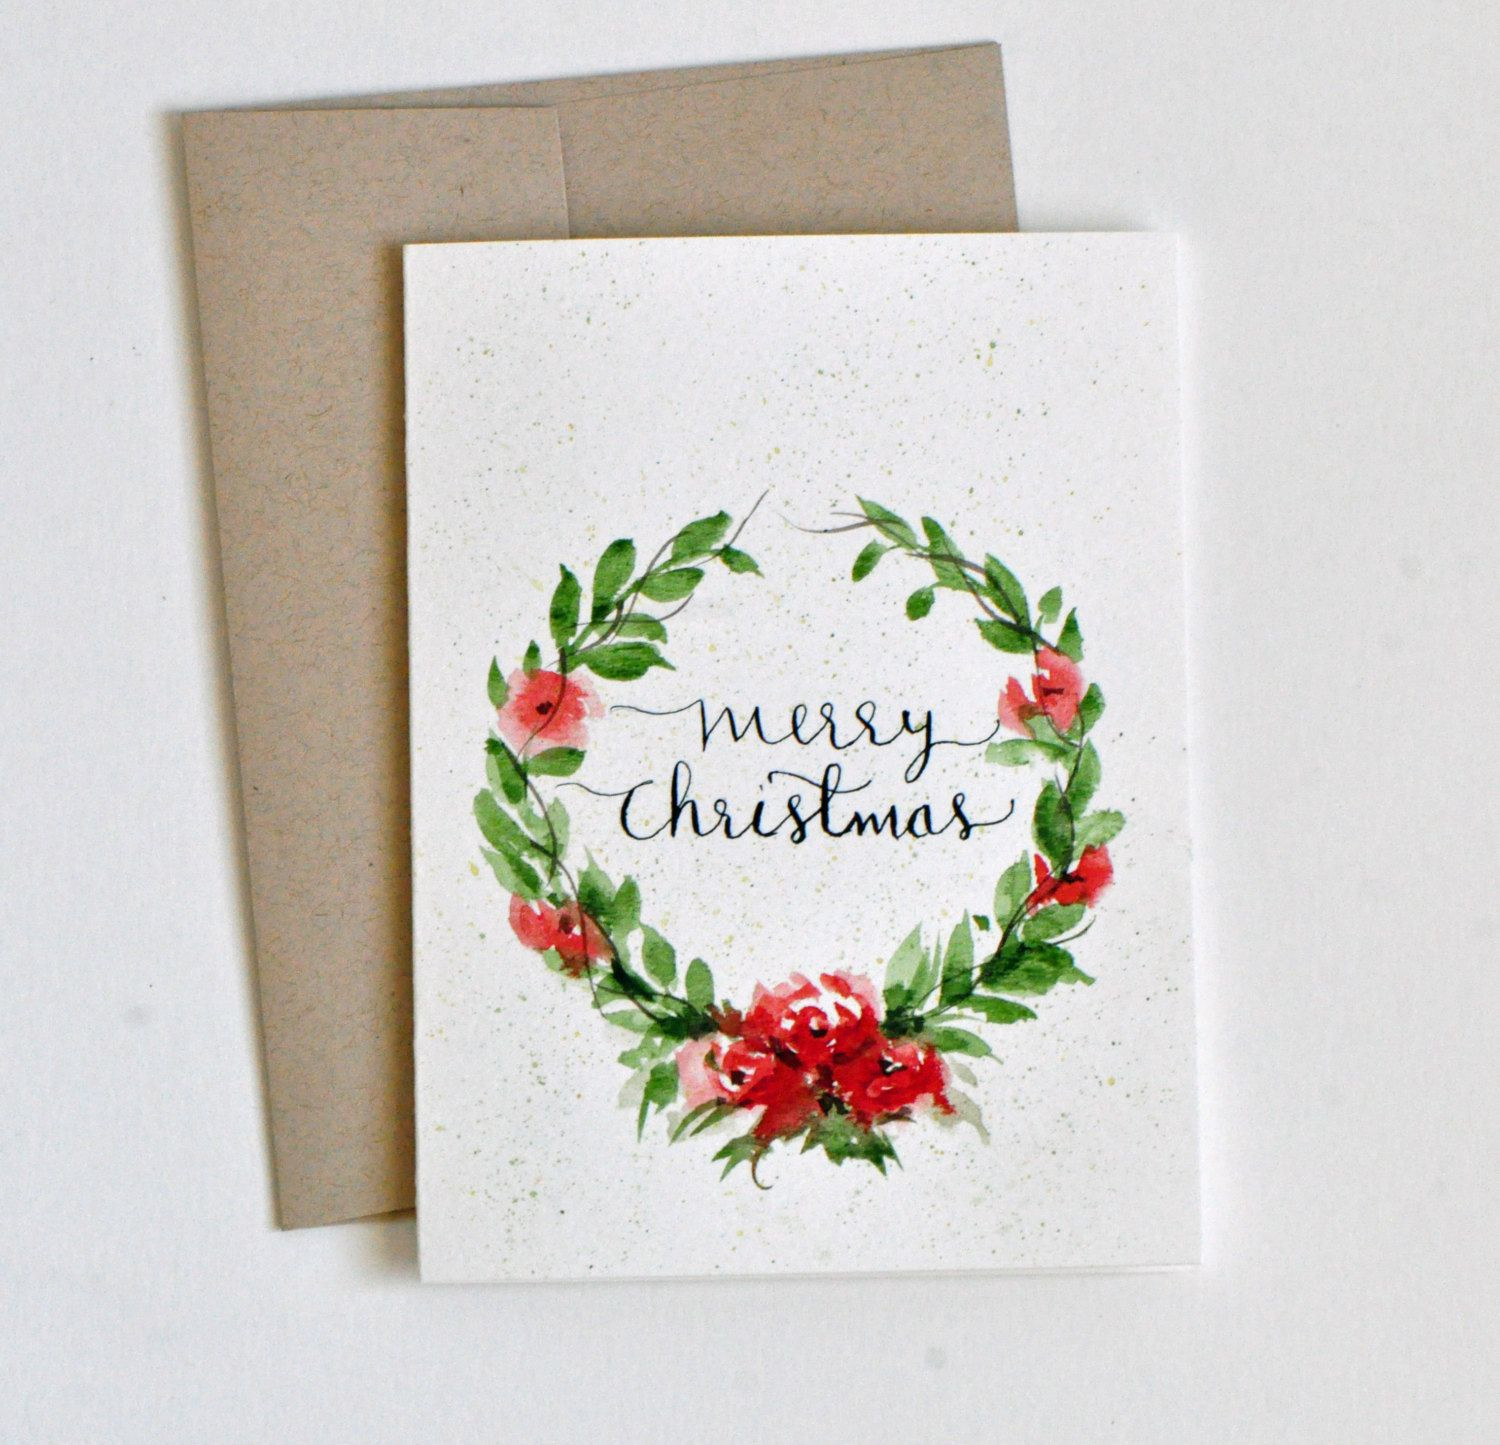 DIY Watercolor Christmas Cards
 Hand painted Watercolor Christmas Card watercolor by